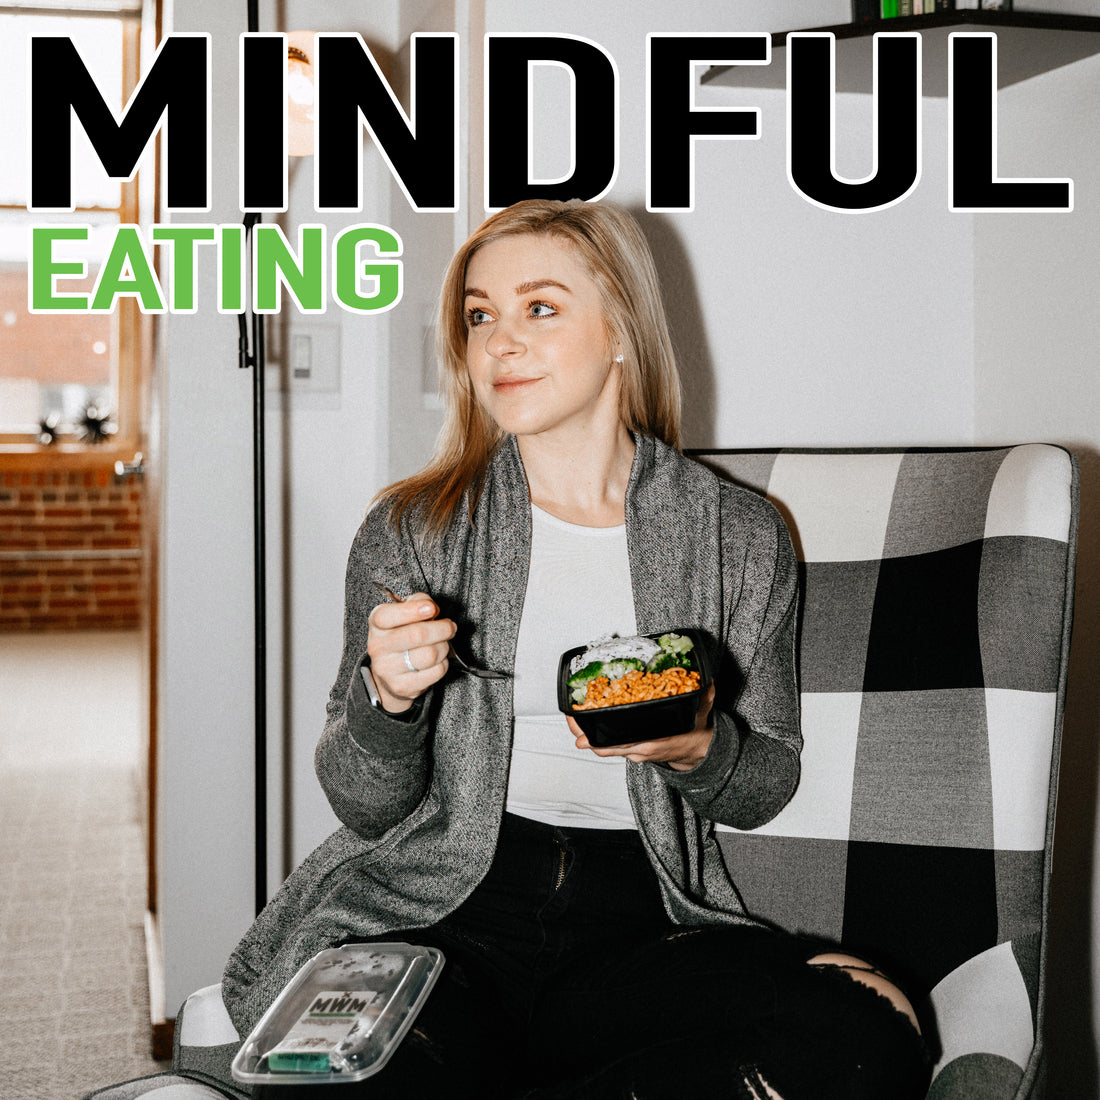 Mindful Eating: How to Develop Your Self-Control and Eat Healthy Step-by-Step